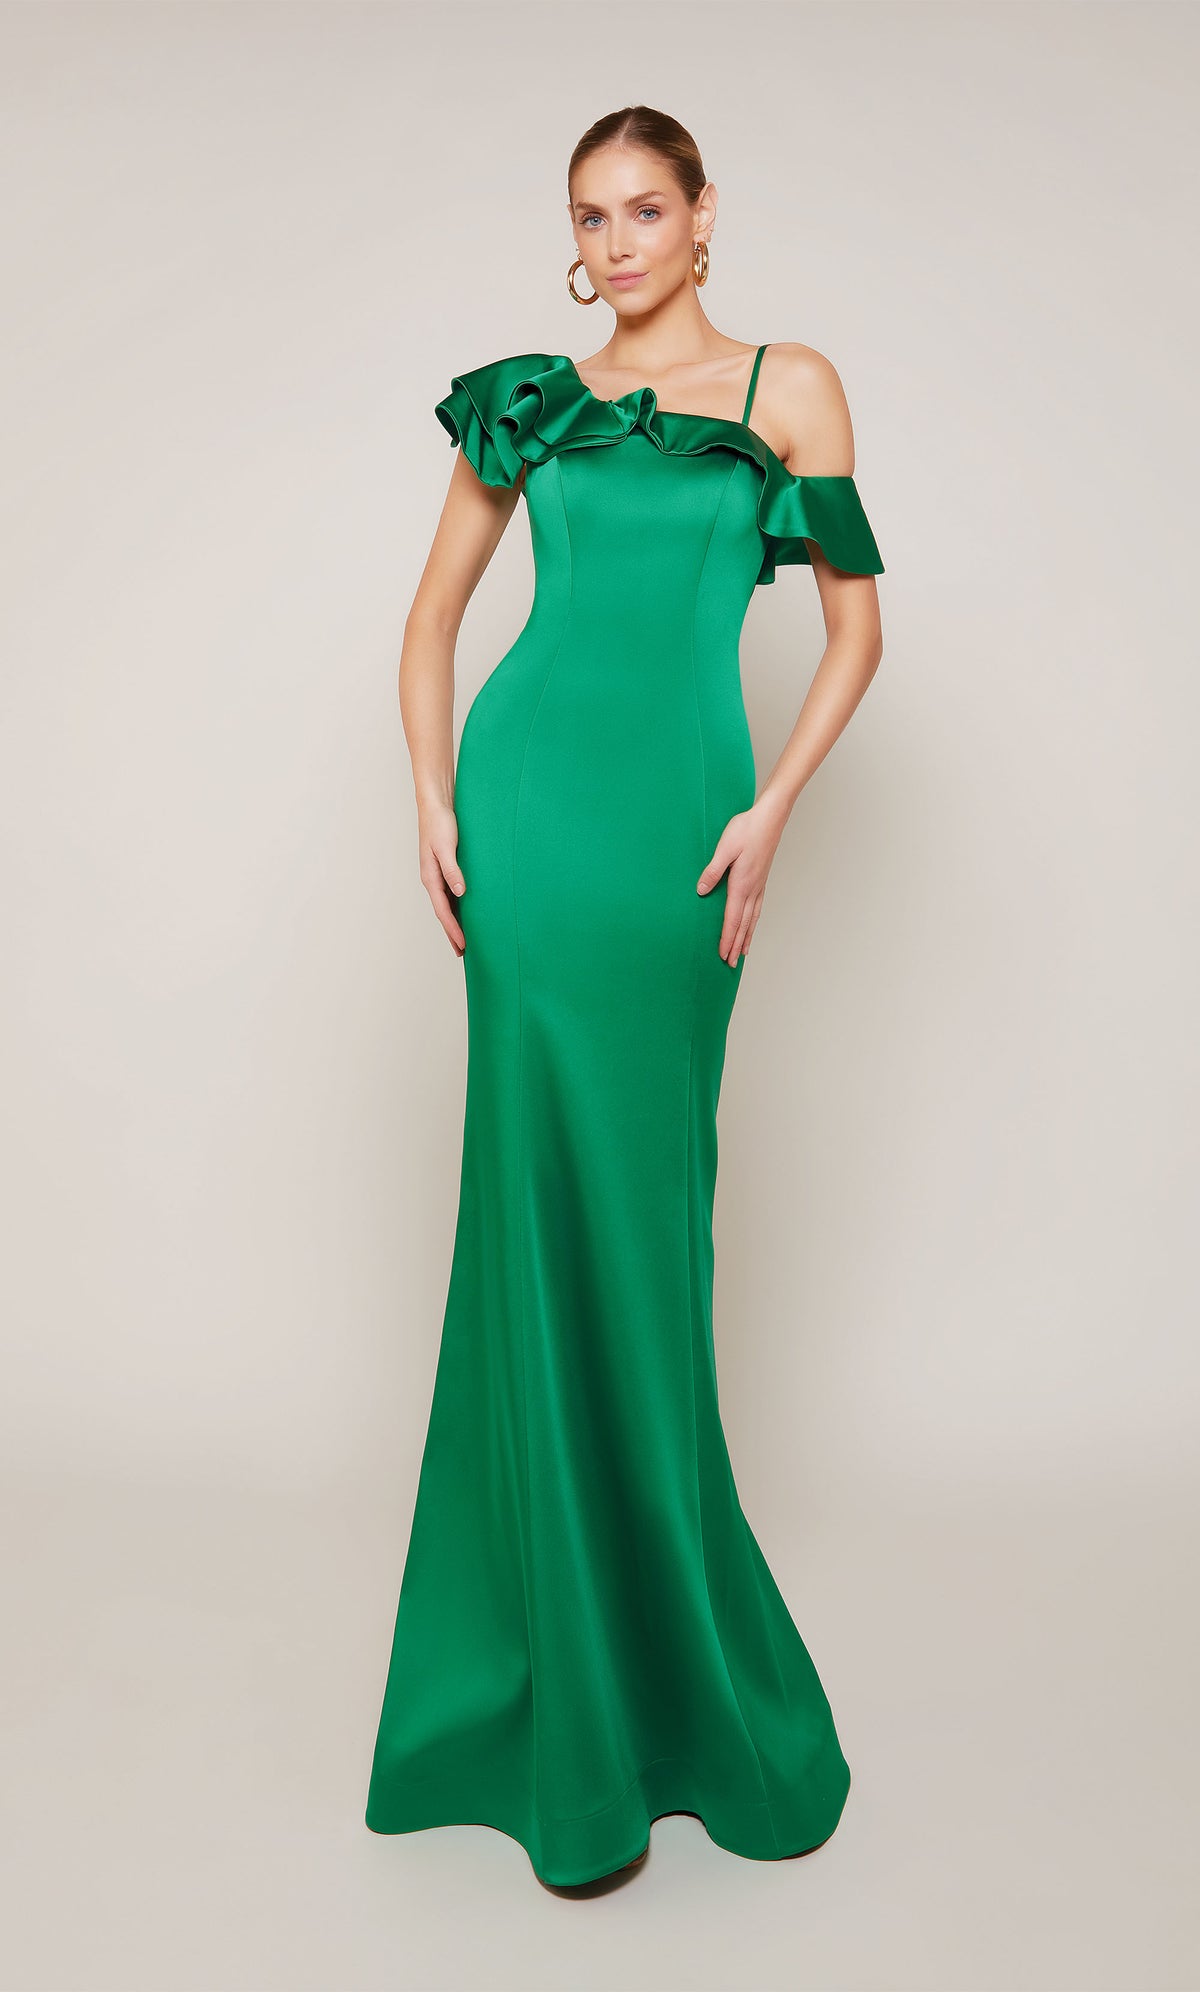 A satin formal dress featuring a one shoulder neckline, a fitted silhouette, and ruffles in emerald green.